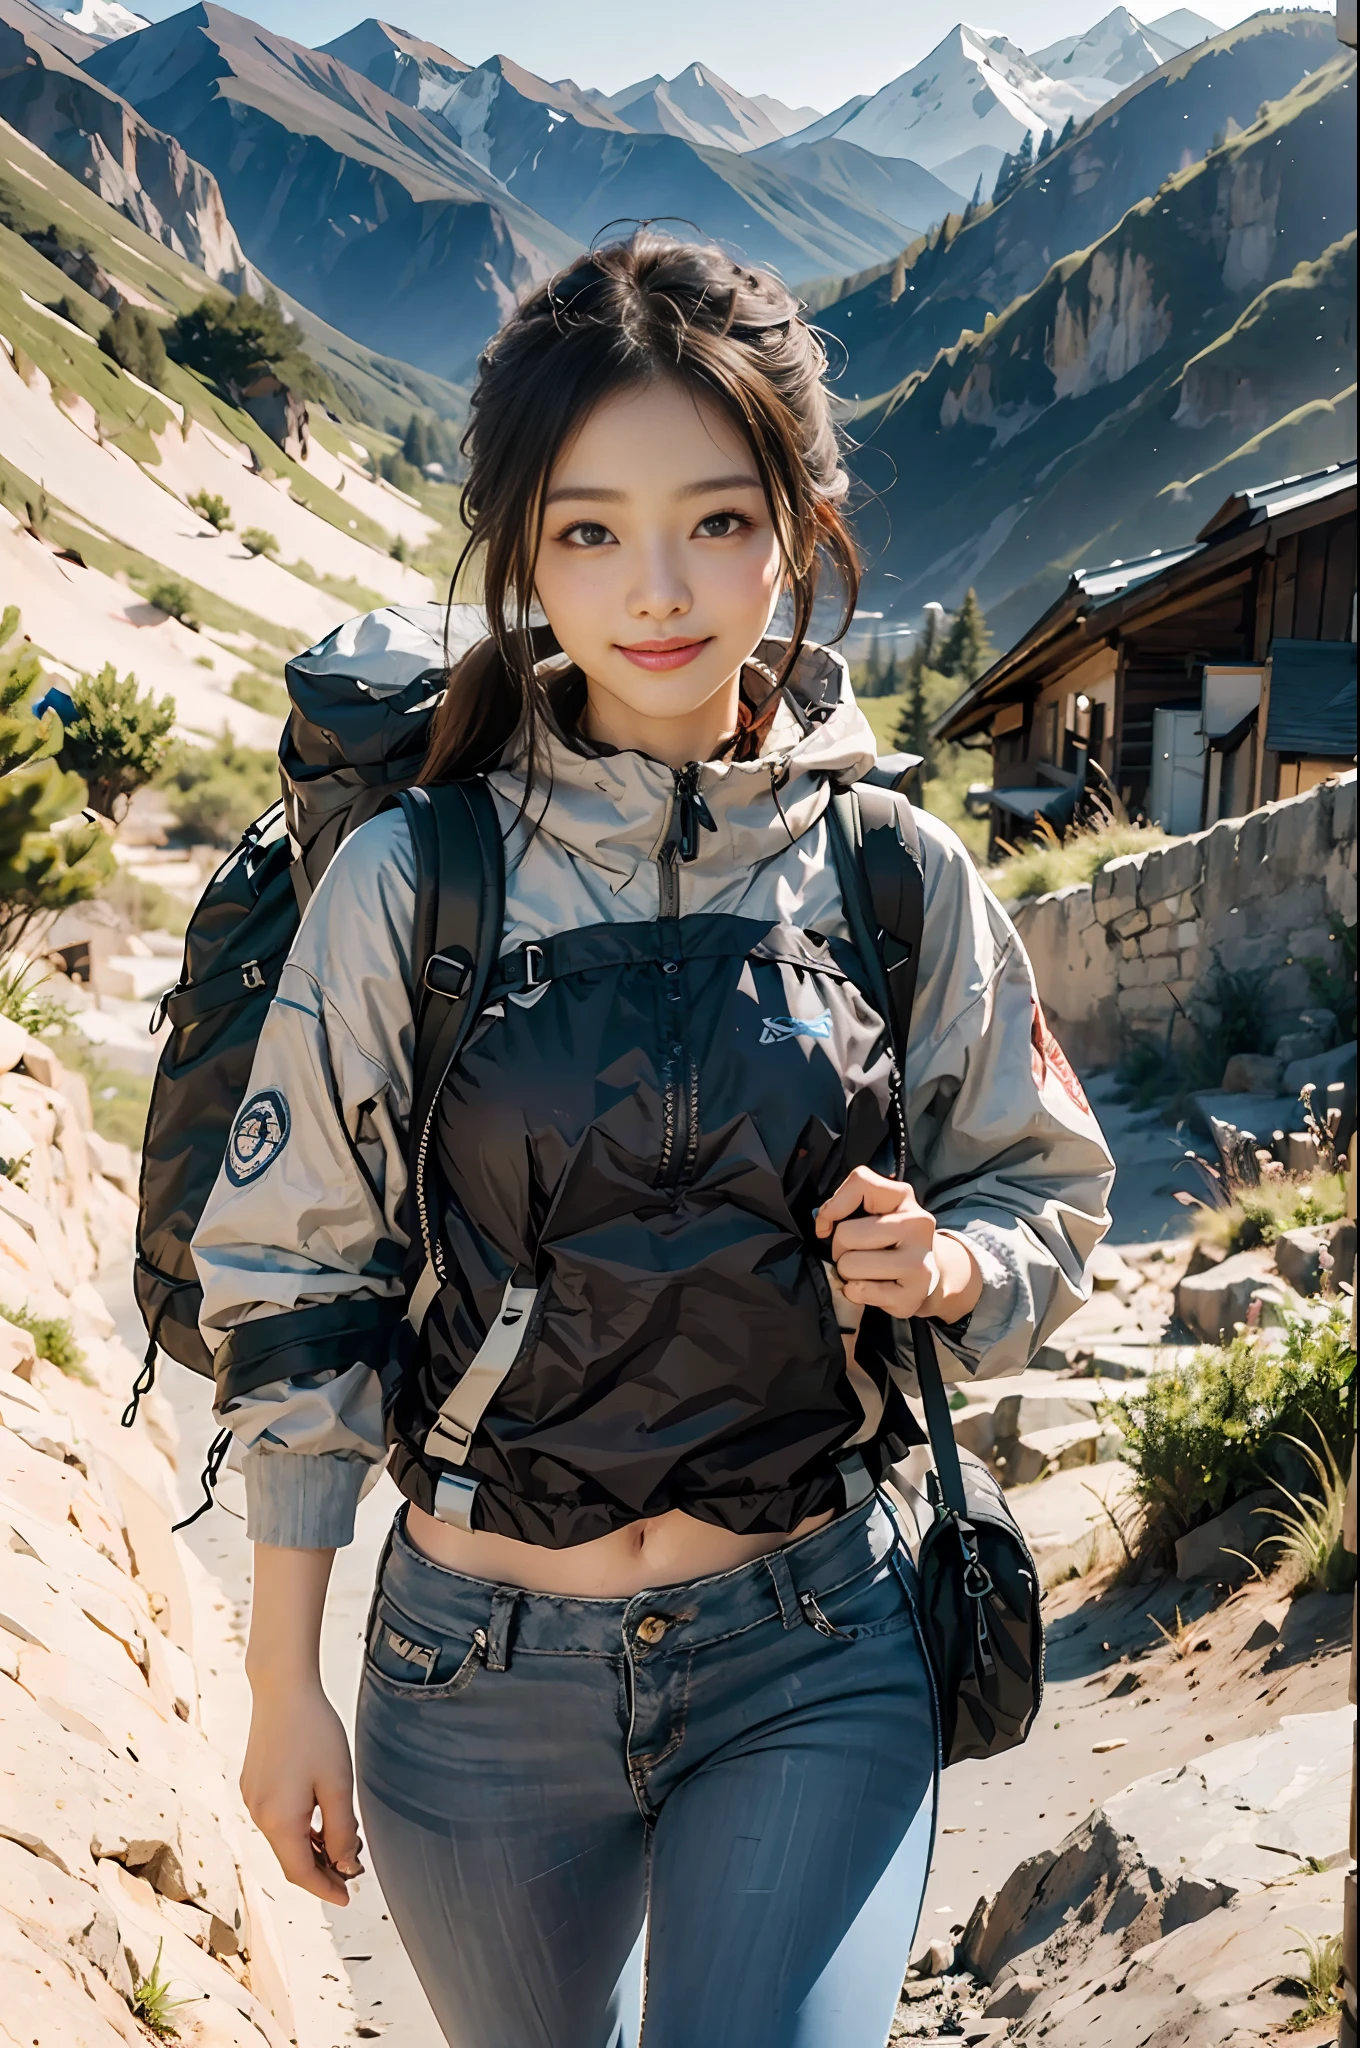 (шедевр、beste-Qualit、8k wall paper、A high resolution、A hyper-realistic)、2girls、Whole body from a little distance, facing front、Beautiful Face、Beautiful eyes、Beautiful nose、Beautiful mouth、Wear black-eyed patagonia, Carrying a large backpack:1.2、Mountain girl style、backpacker, mountaineer, In the middle of climbing、Watching a beautiful sunset、Trekking Shoes、Half pants、2 girls、2 people、Smiling and smiling